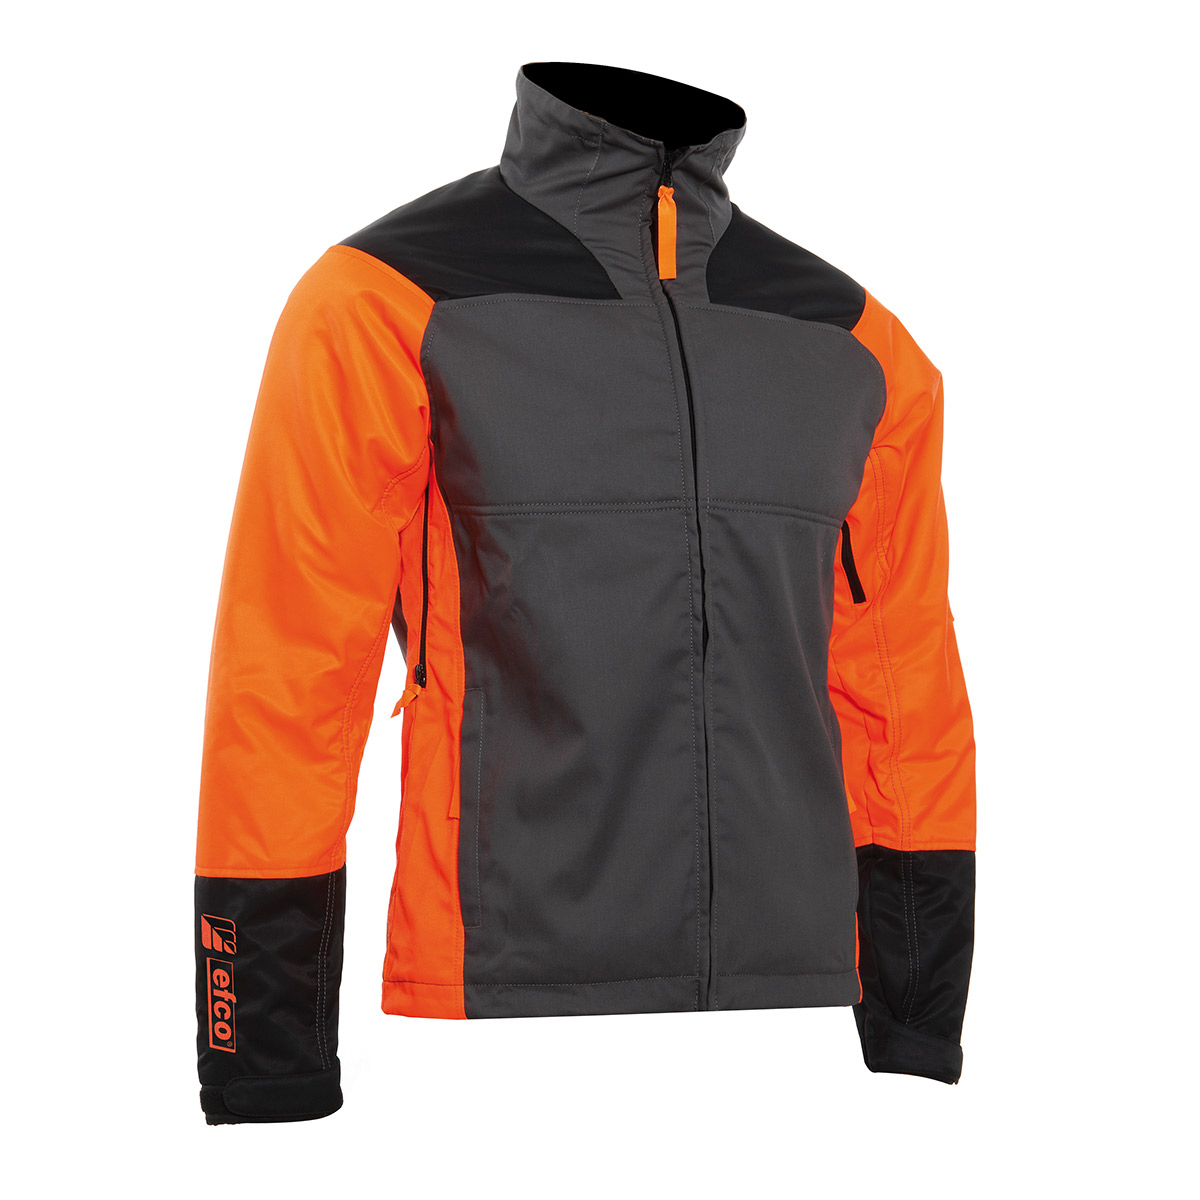 Jacket with anti-cut protection: Jackets with anti-cut protection for ...